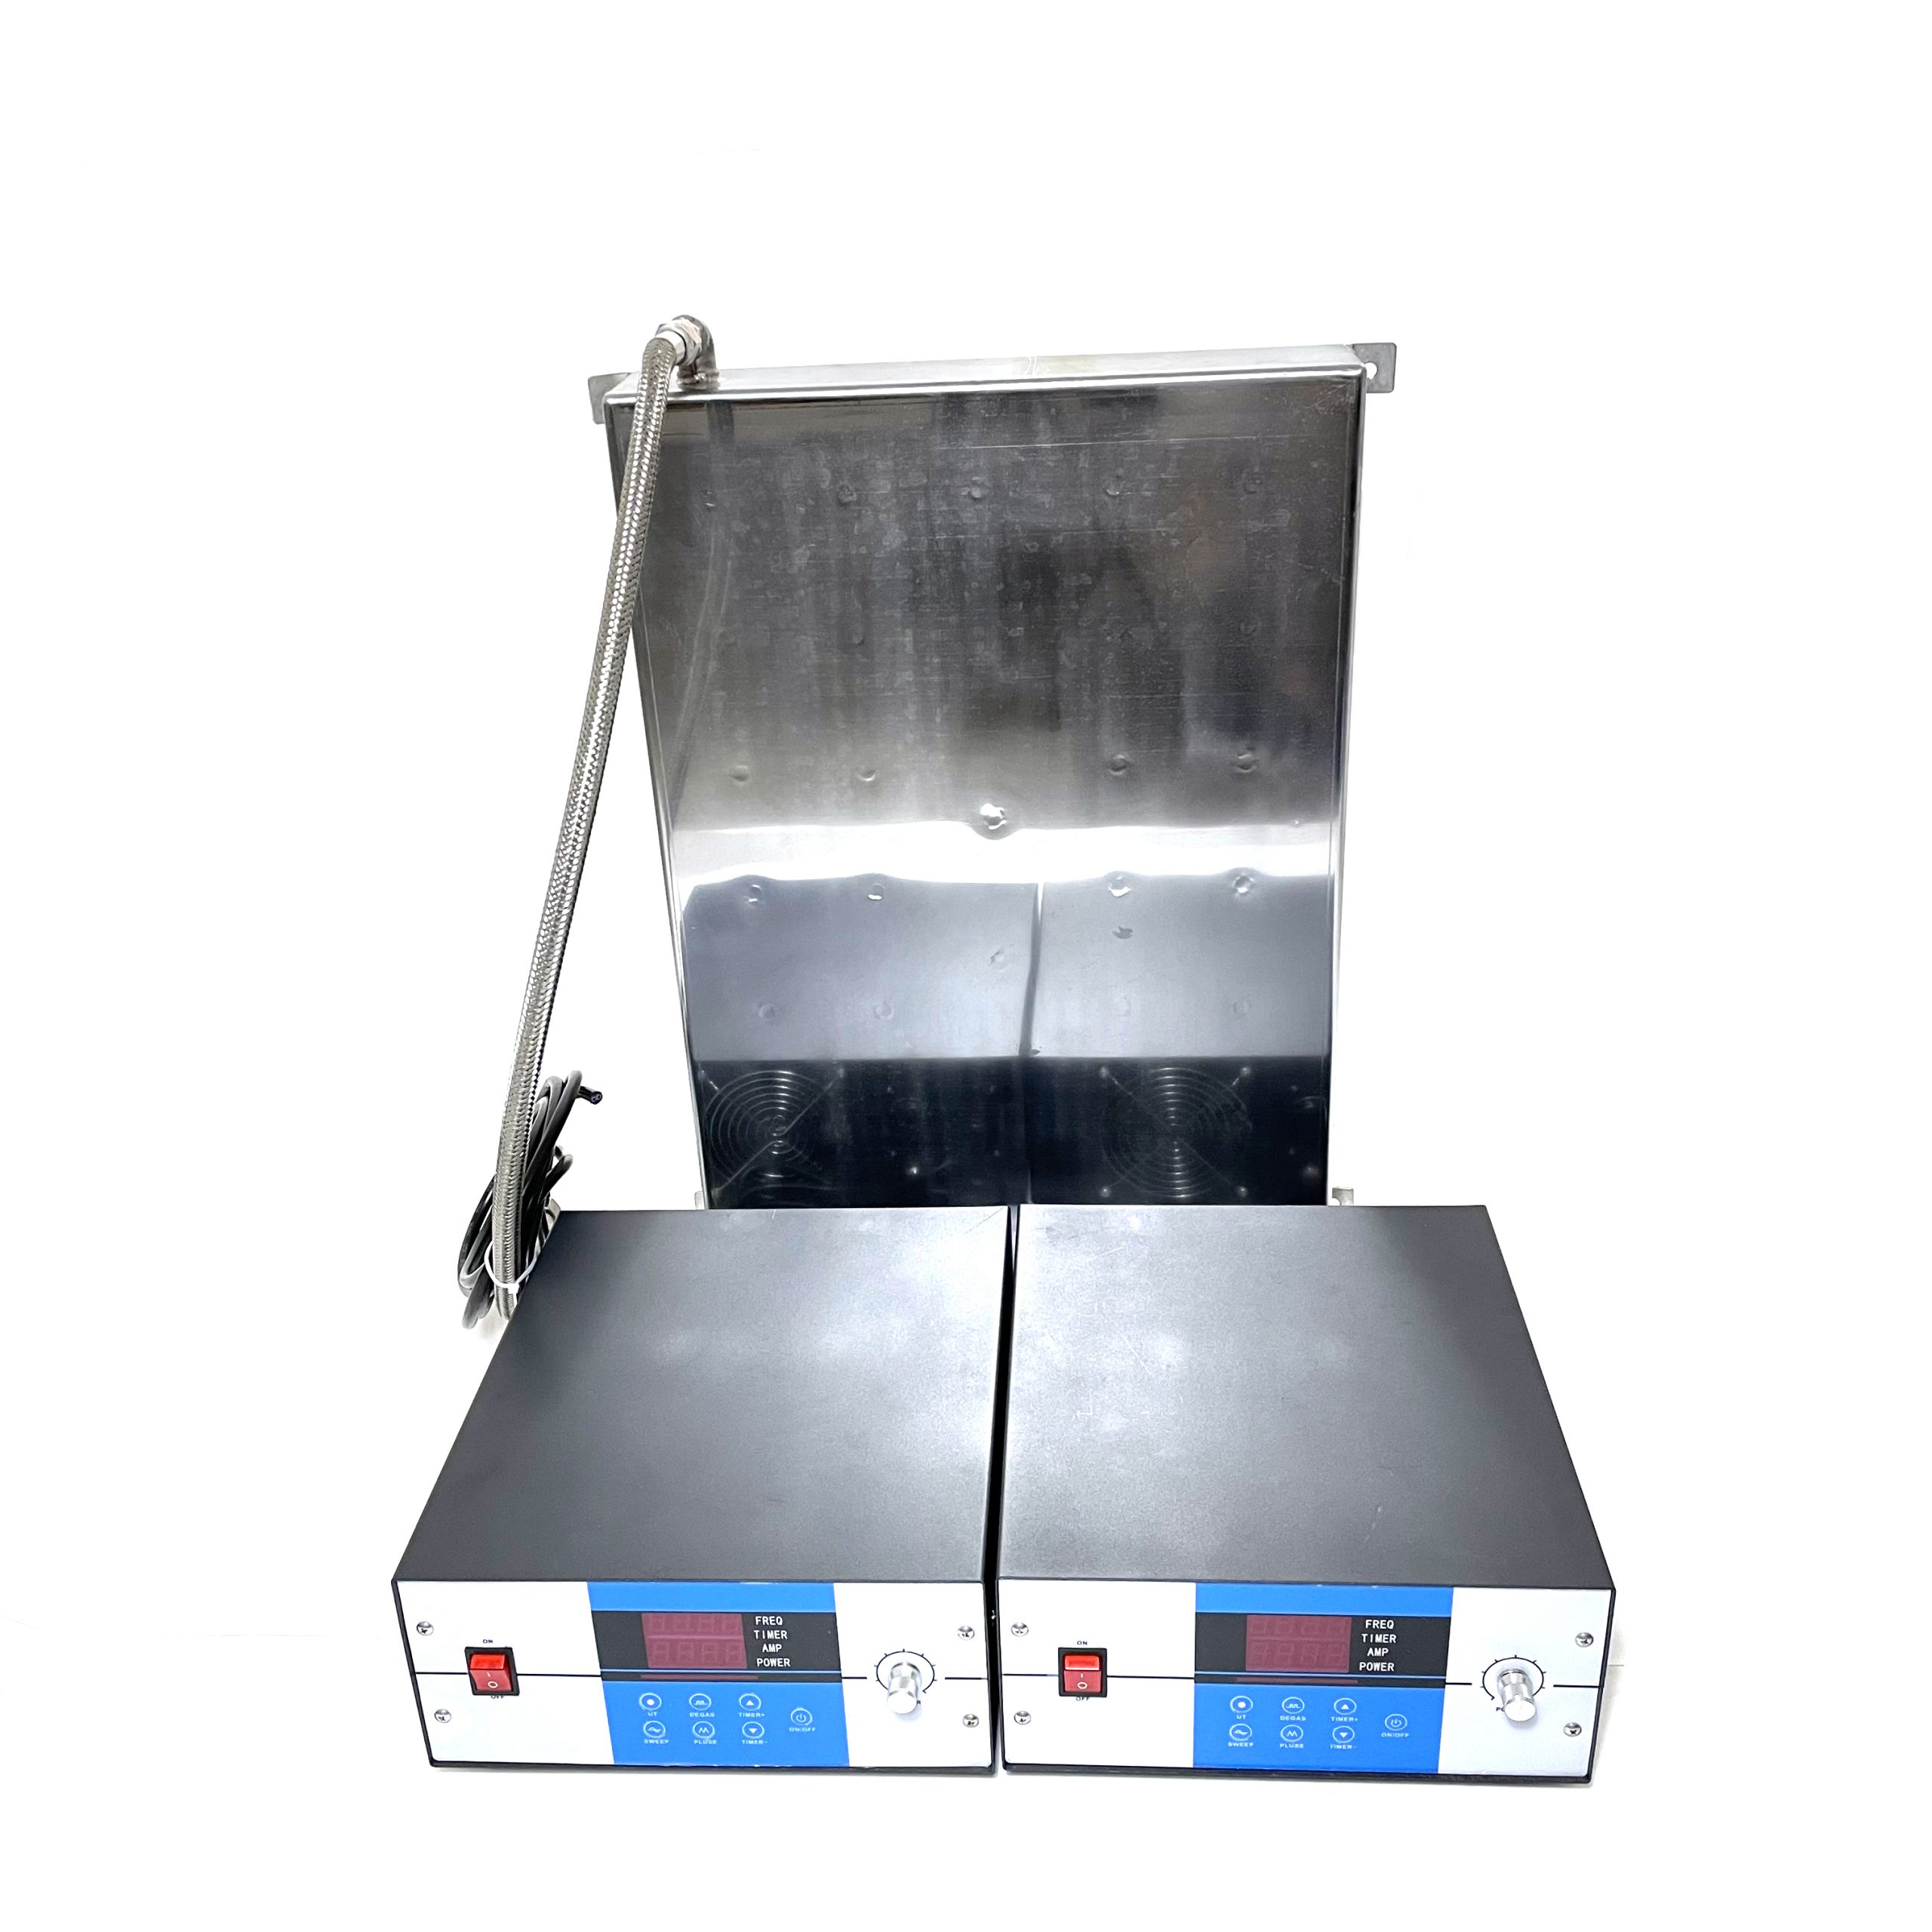 1000W 28KHZ/40KHZ/80KHZ Digital Multifrequency Submersible Ultrasonic Cleaner With Frequency Generator